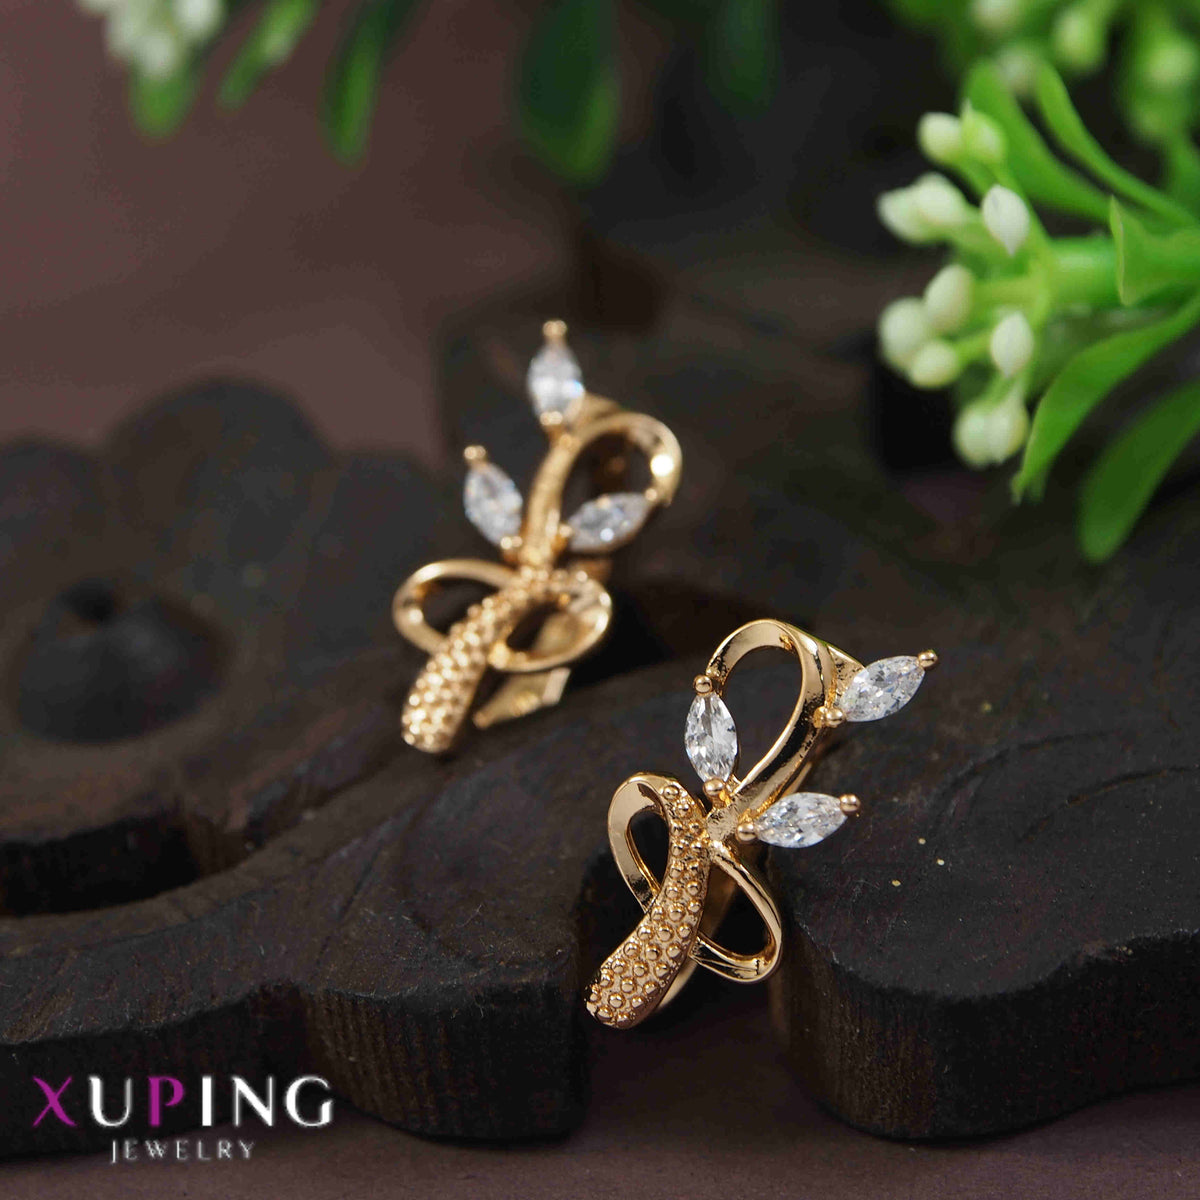 Gold Plated Unique Style Cubic Zicronia Xuping Earring- XPNGER 4524